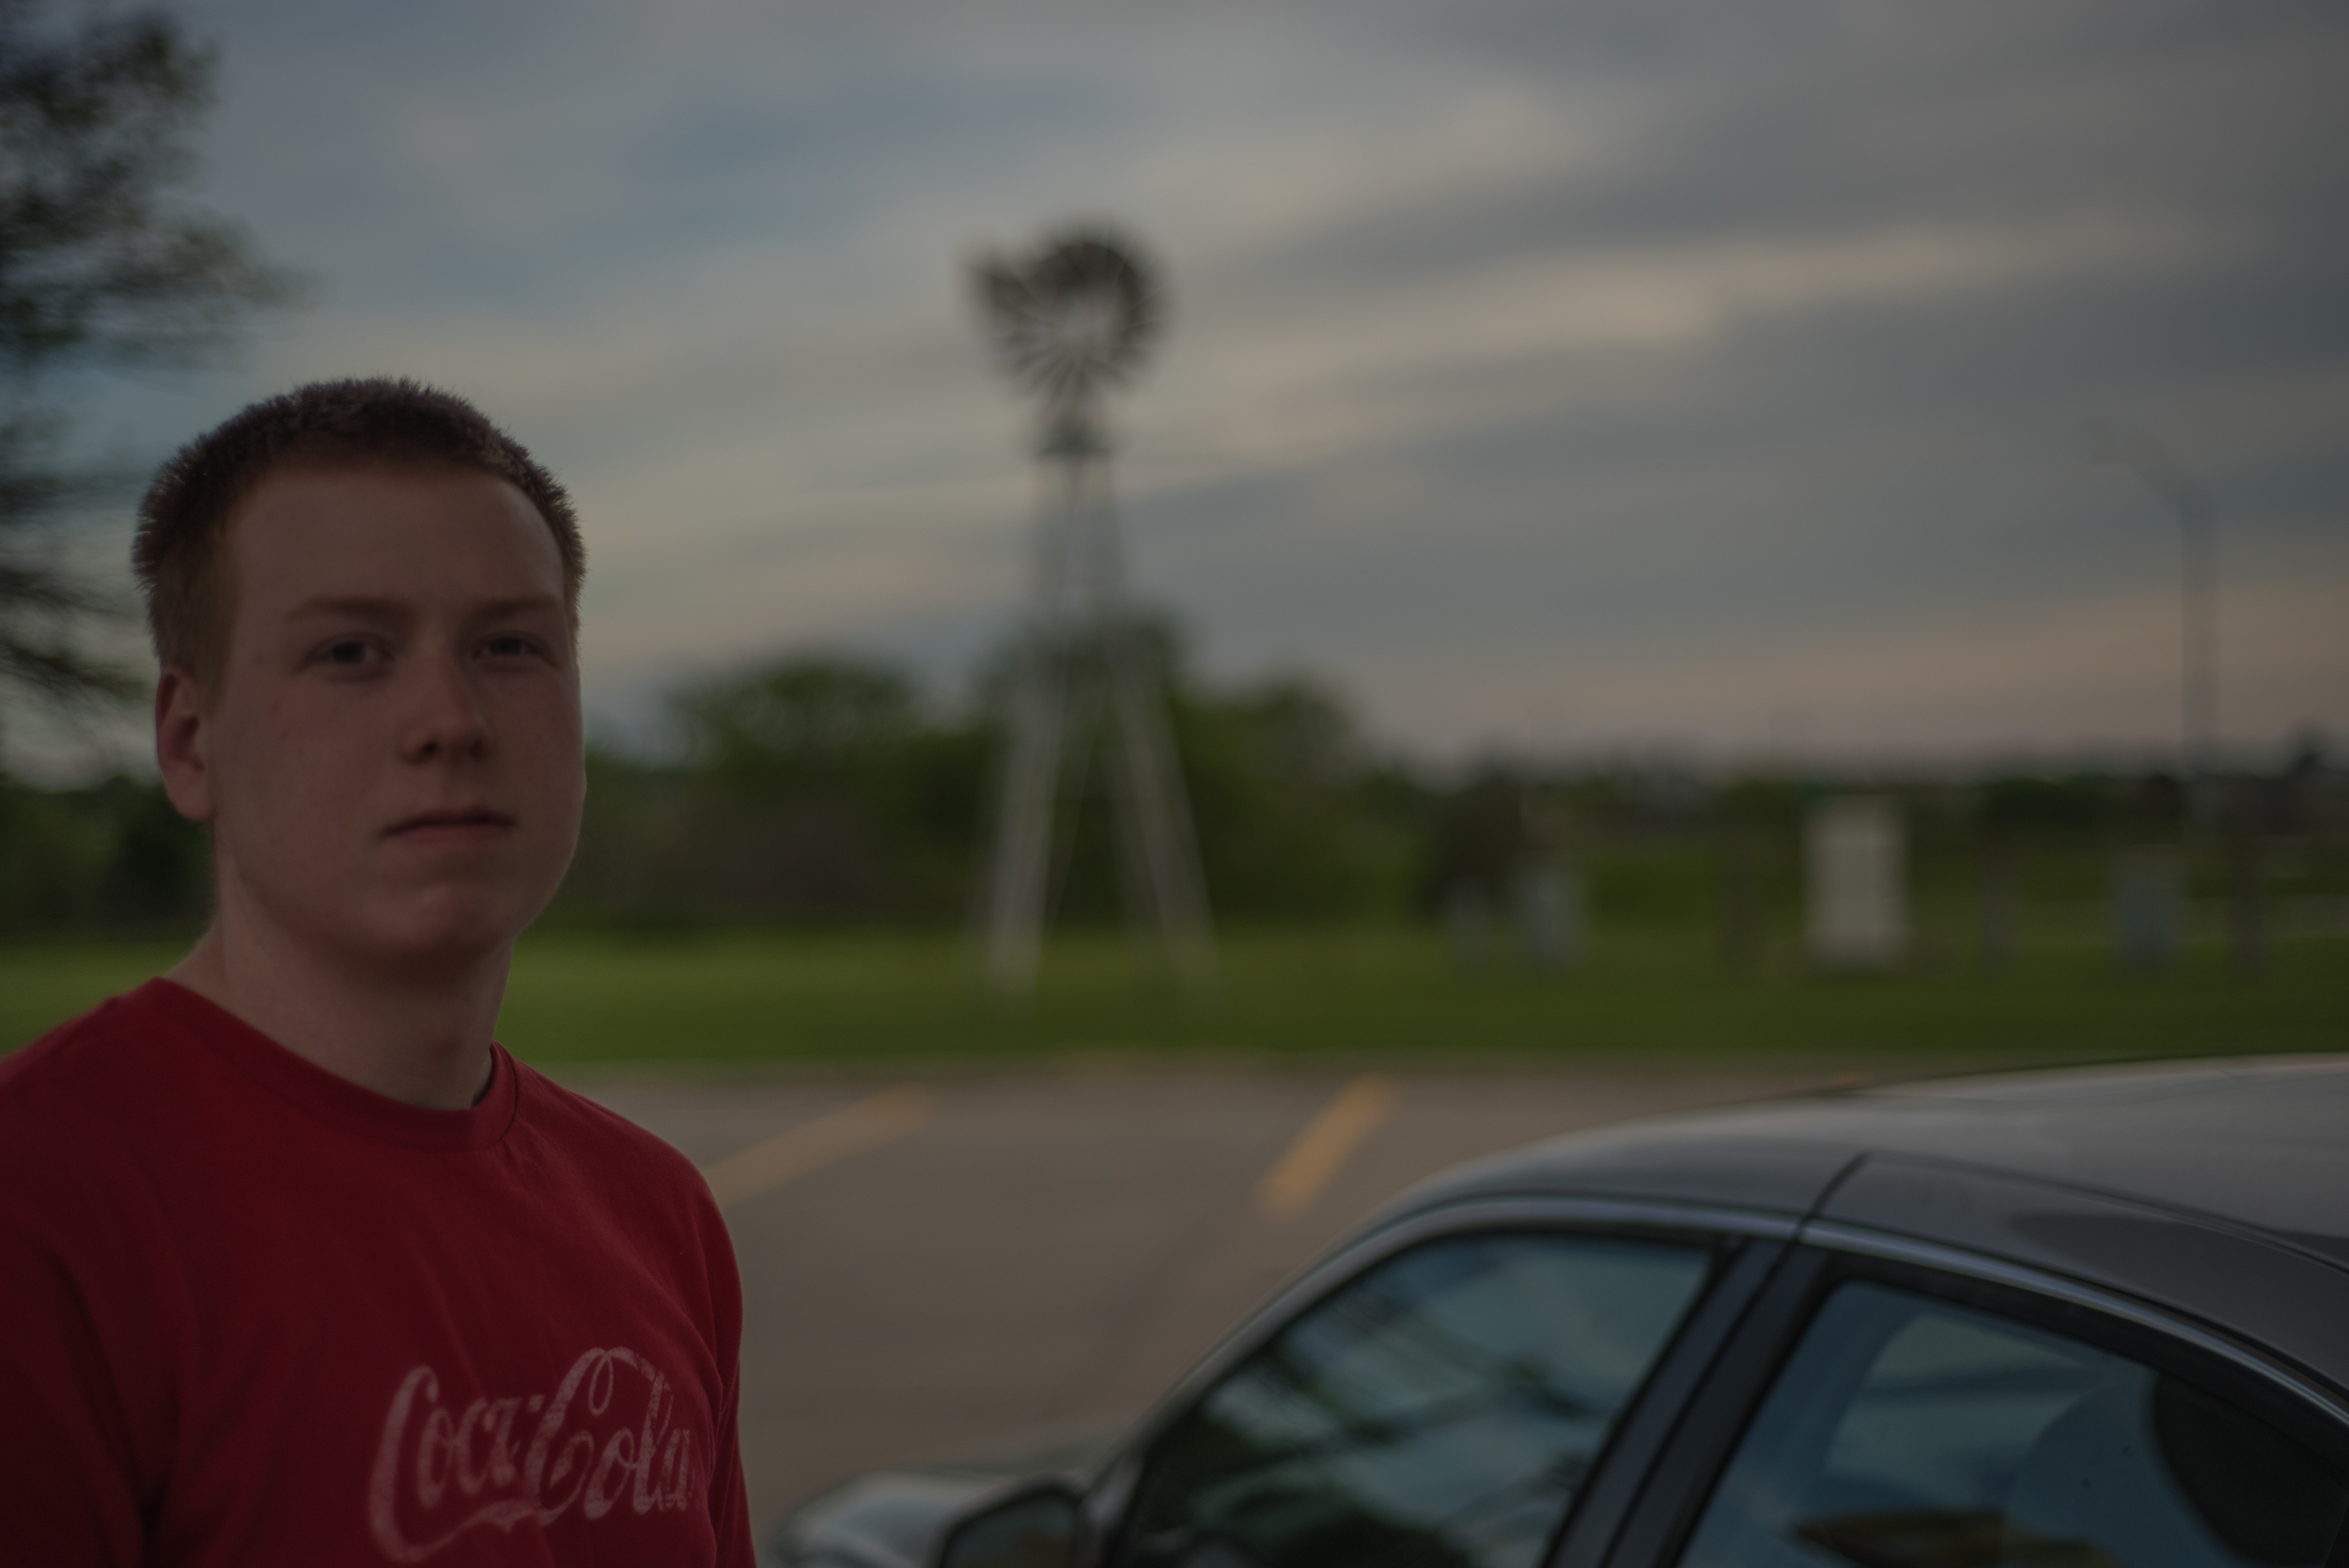  Scoring an internship in New Mexico, this guy was on a trip across the country from Wisconsin to make it to the job on time. This was photographed outside of Des Moines, Iowa.&nbsp; 